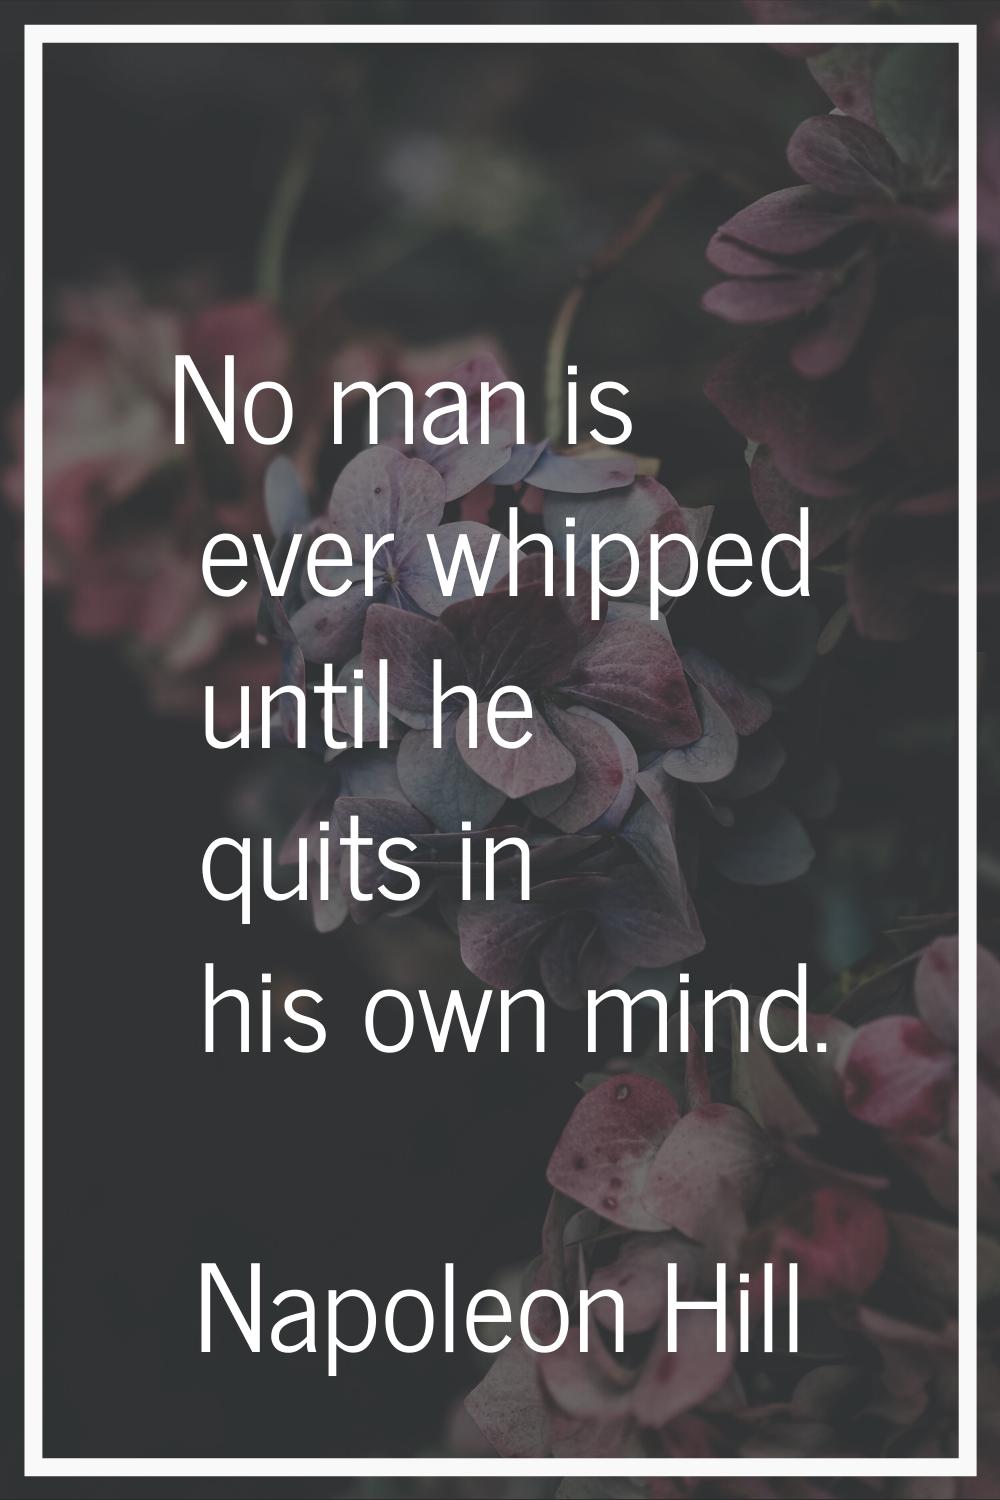 No man is ever whipped until he quits in his own mind.